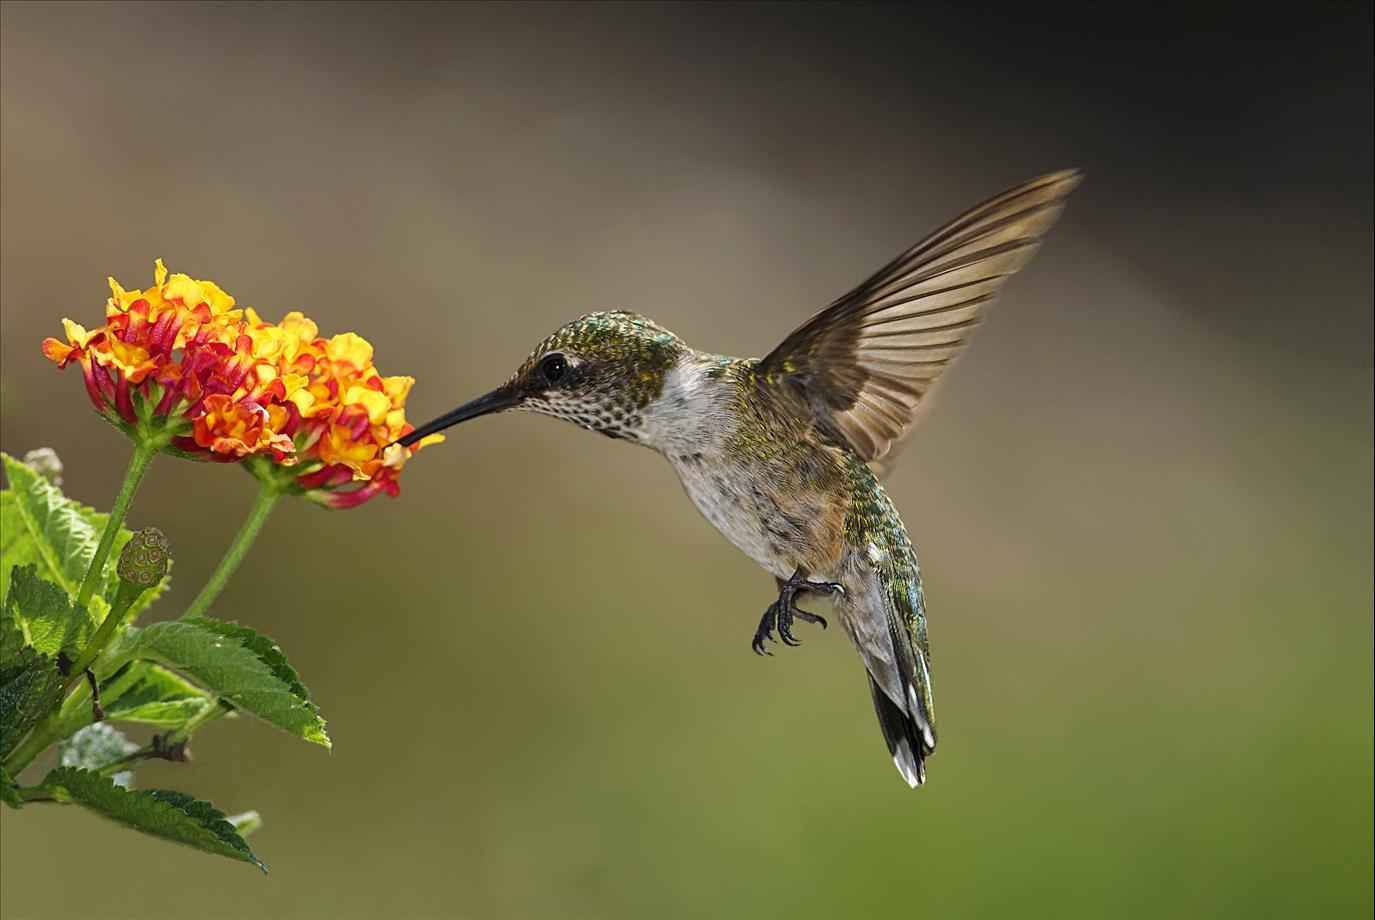 The Hummingbird Lines Up To Become A National Symbol Of Costa Rica